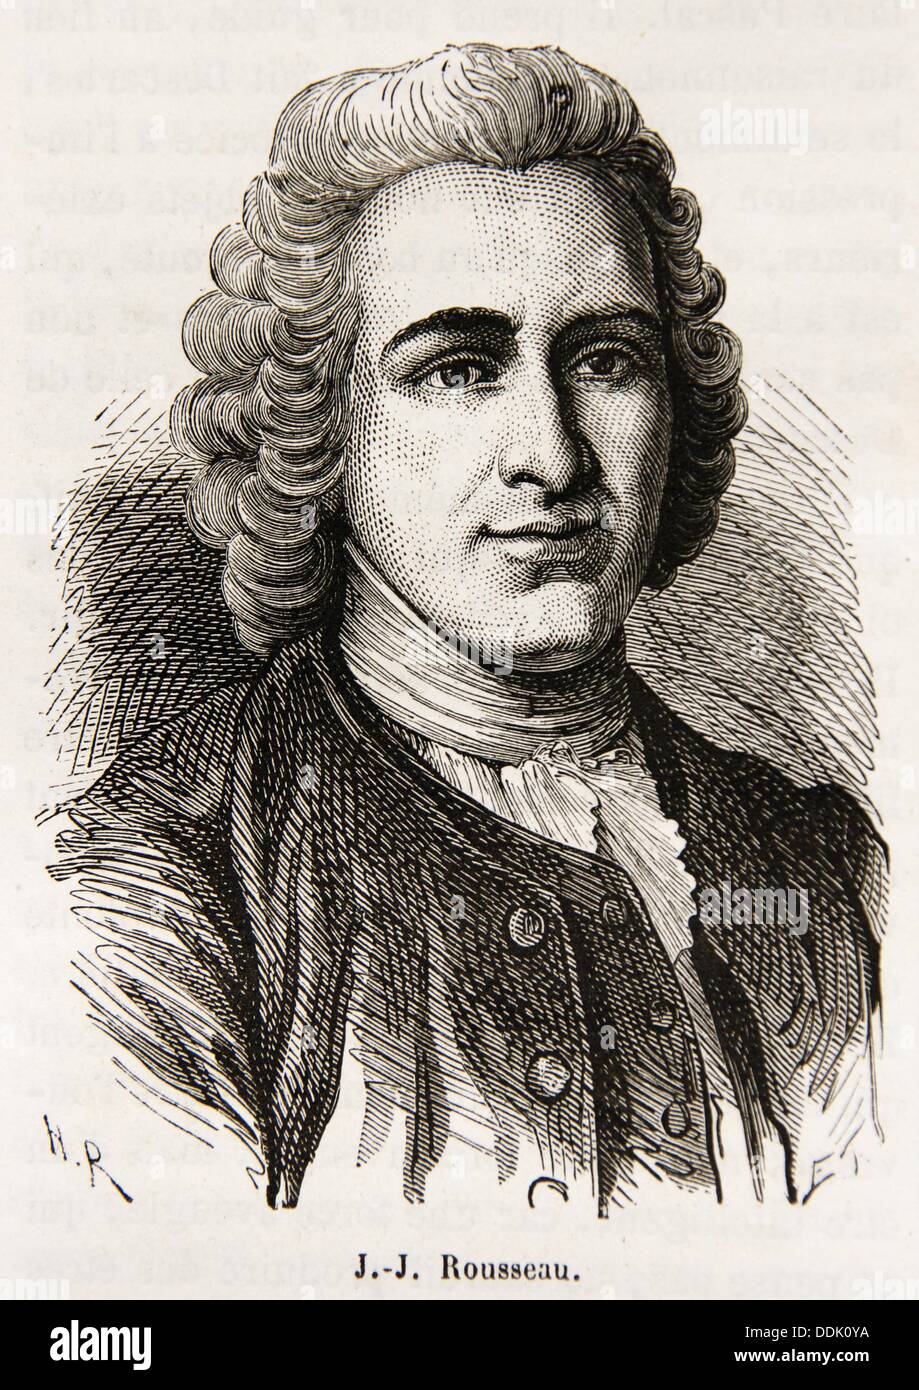 Jean-Jacques Rousseau 28 June 1712 - 2 July 1778 was a major Genevois philosopher, writer, and of the Stock Photo - Alamy